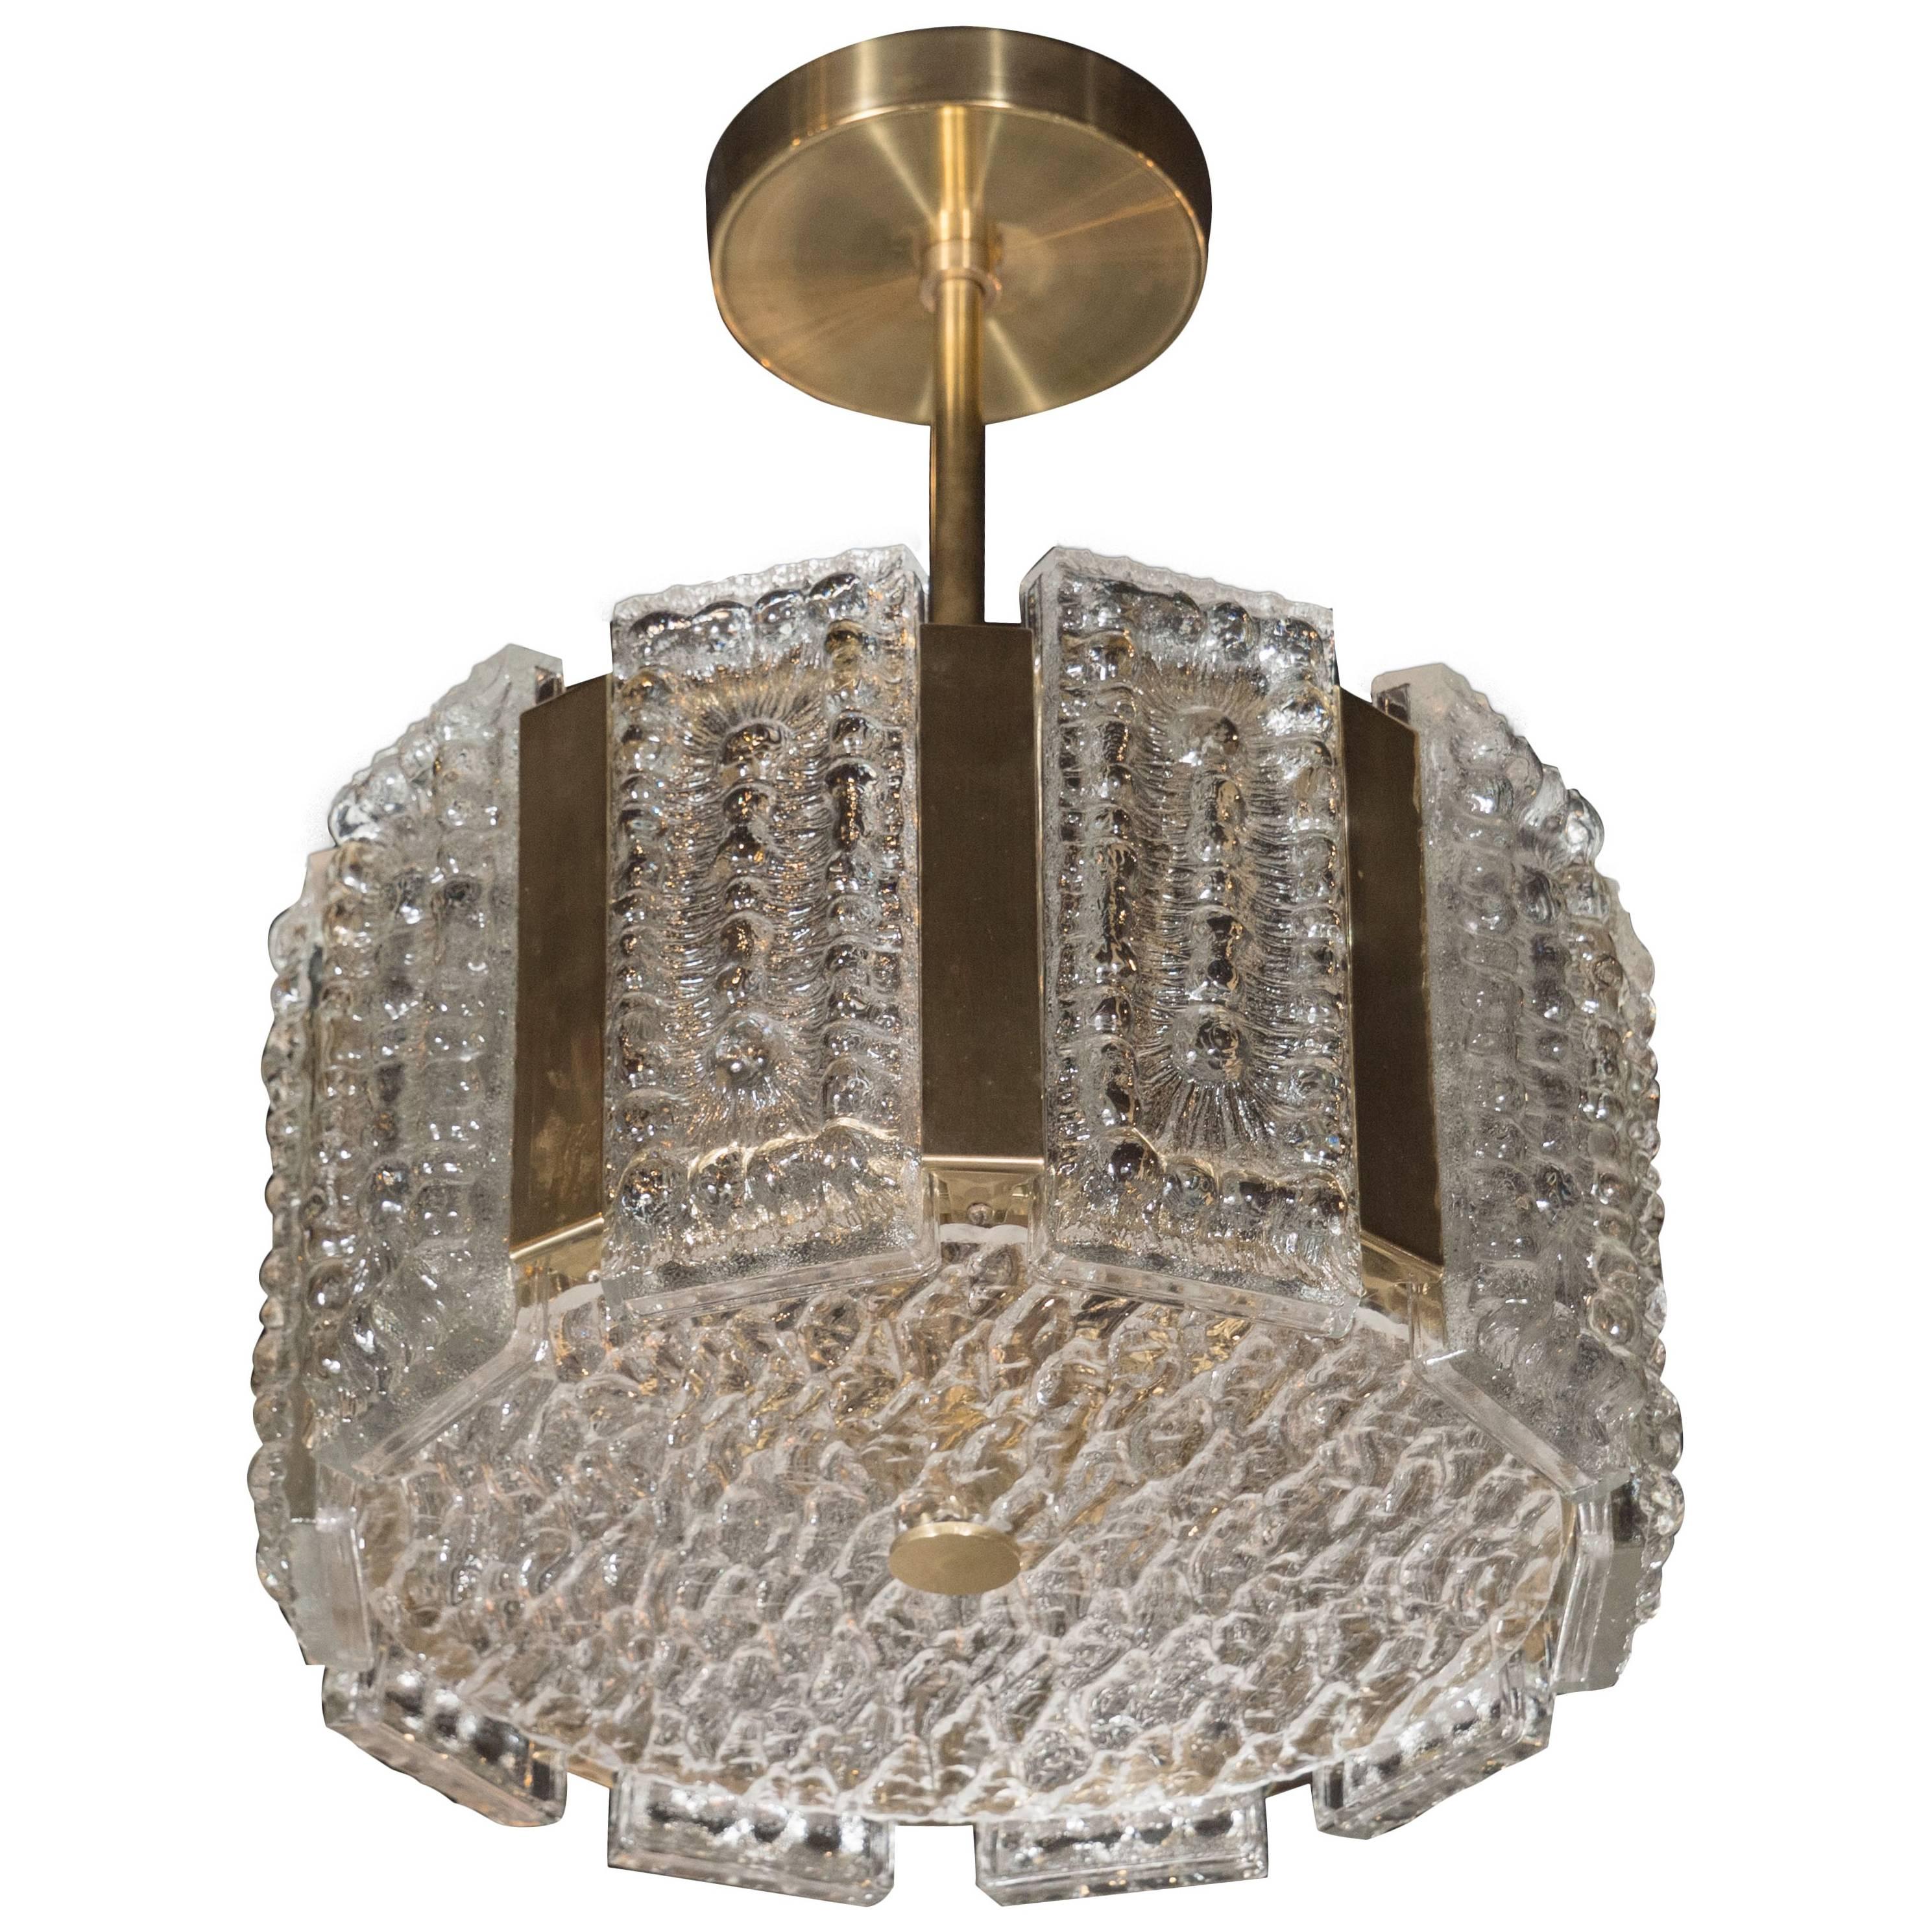 Stunning Textured Glass and Polished Brass Pendant by J.T. Kalmar